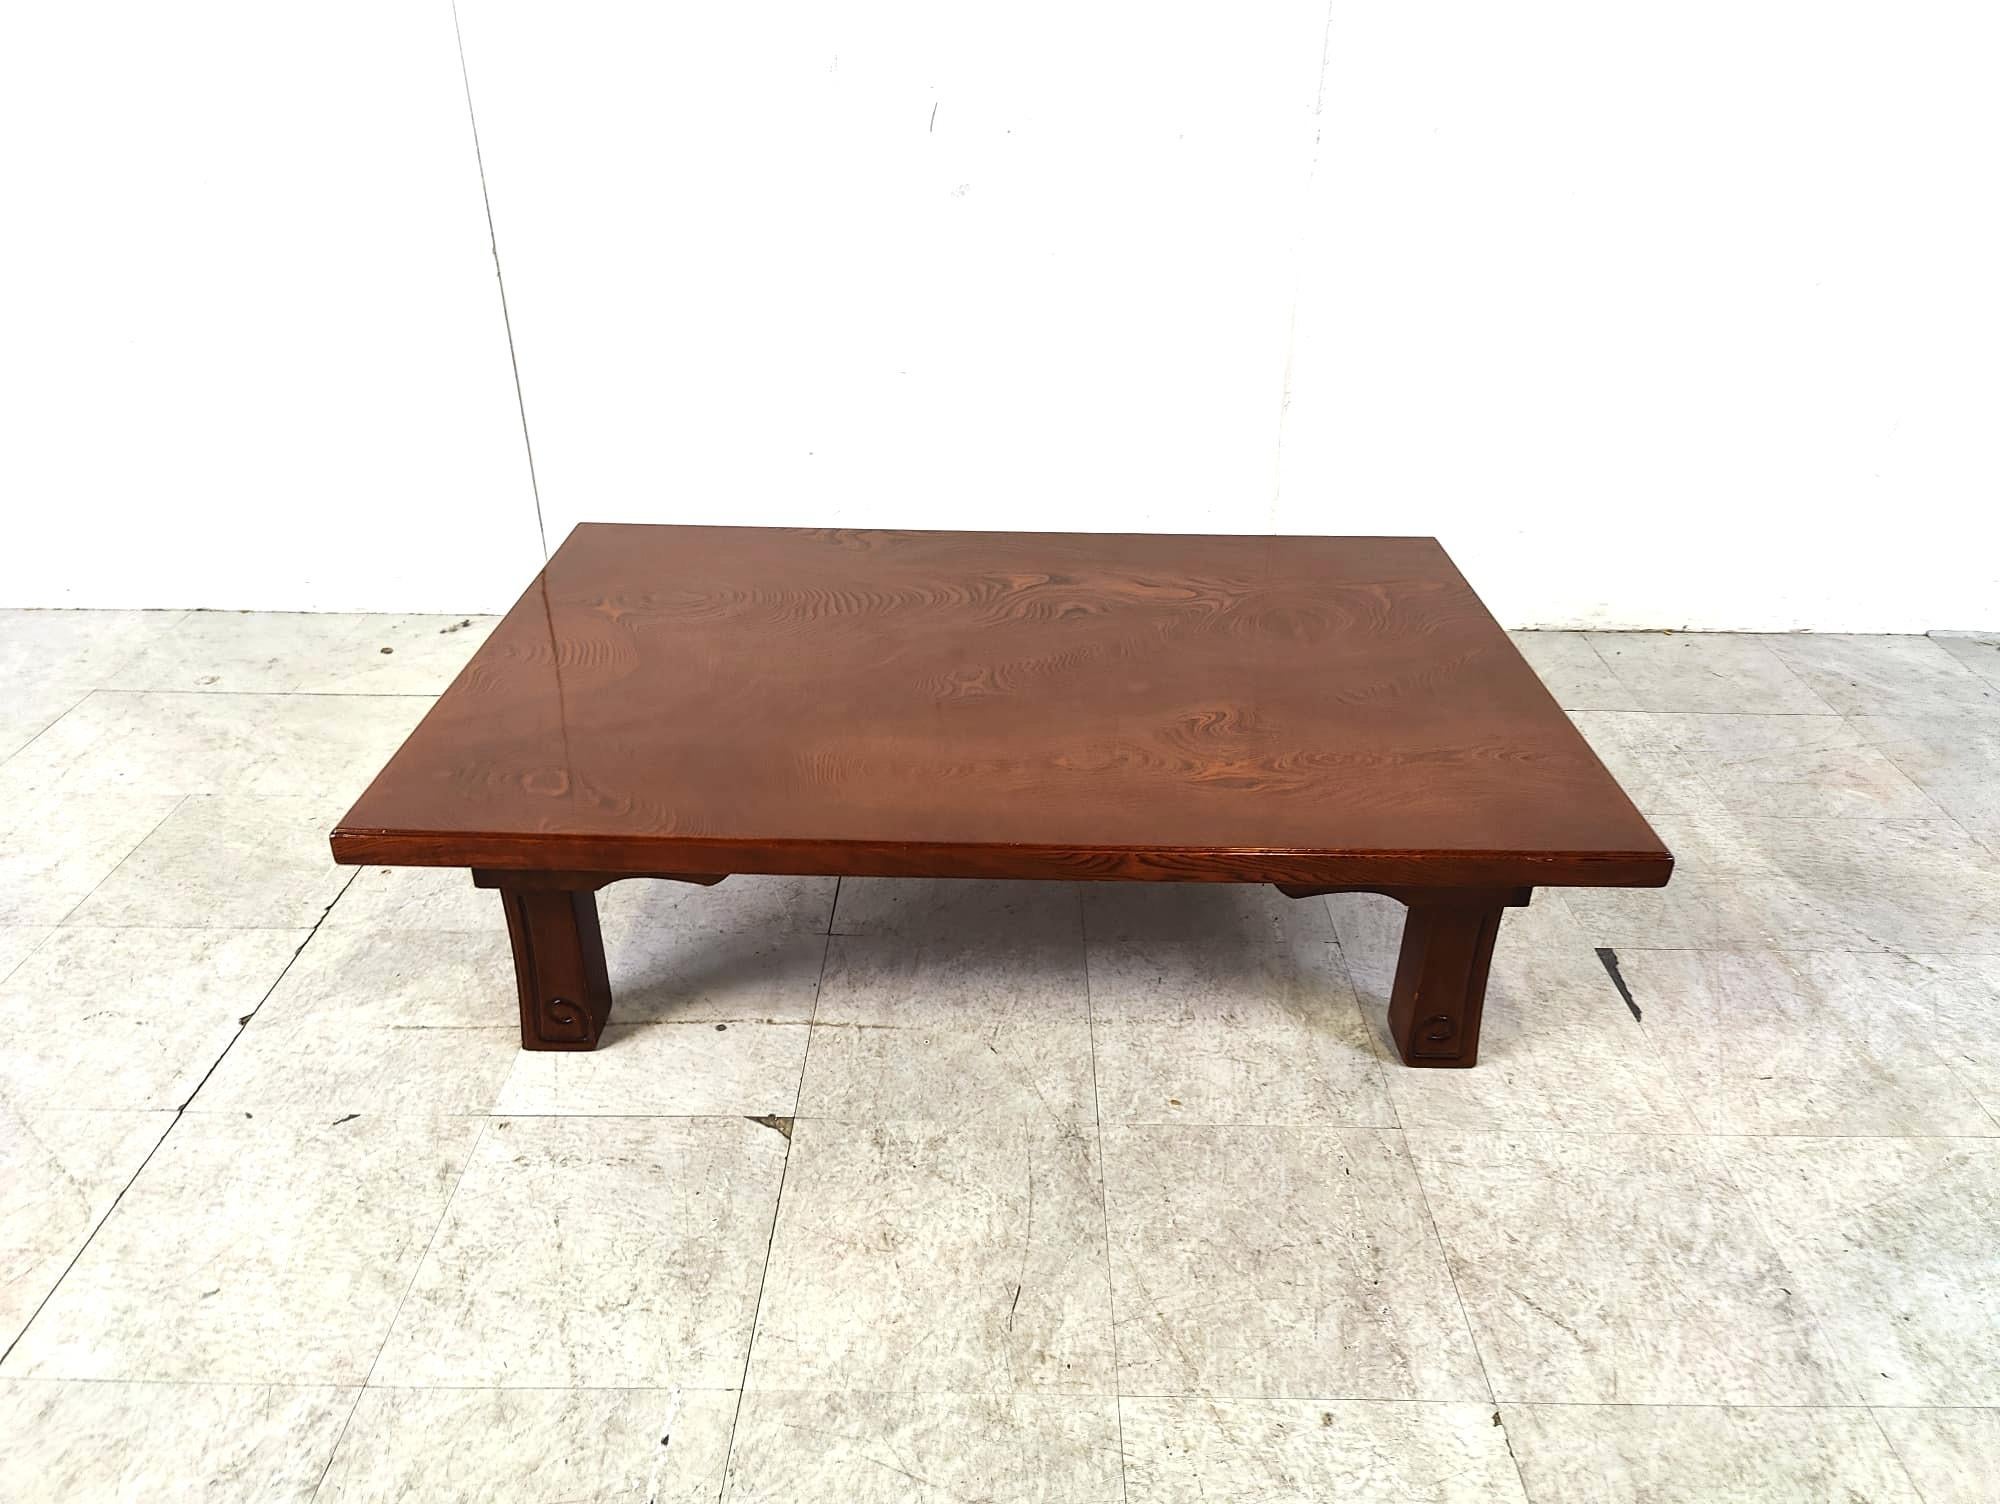 Elegant japanese style coffee table with foldable legs.

Beautiful japanese design and gorgeous wood grain.

1970s - Japan

Very good condition

Dimensions:
Height: 32cm
Width: 122cm
Depth: 82cm

Ref.: 104040